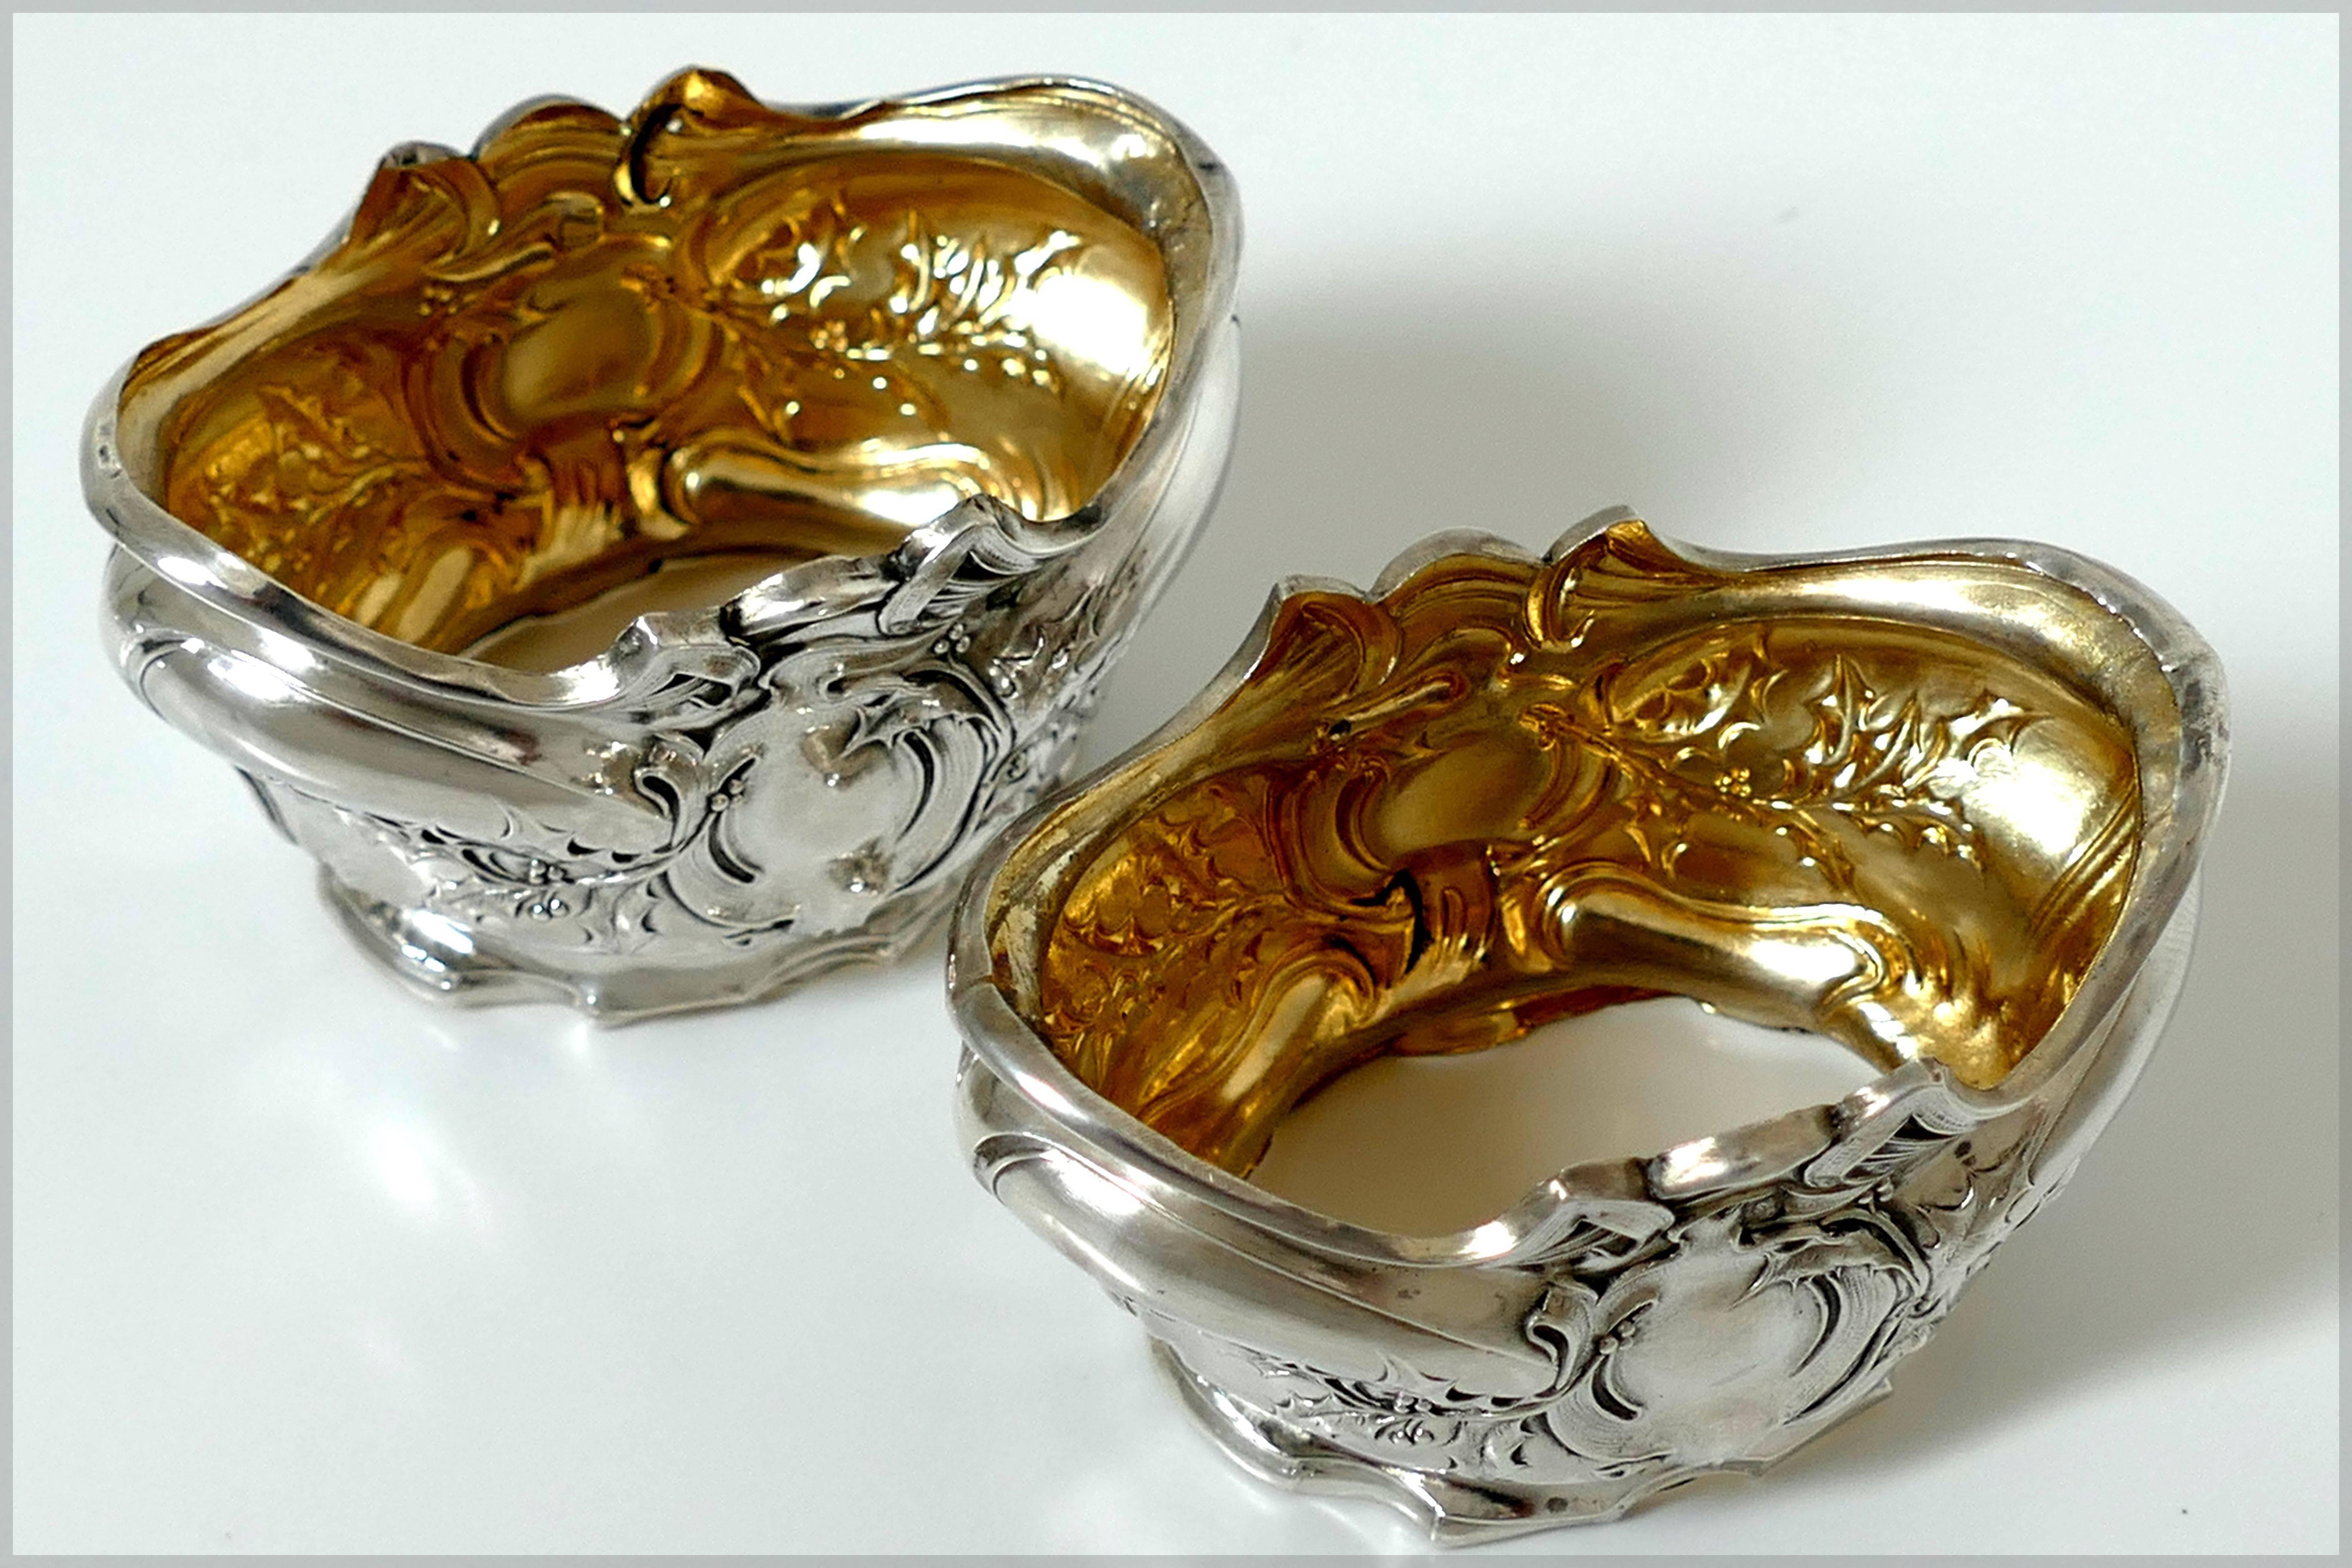 Late 19th Century 1880s French Sterling Silver 18-Karat Gold Salt Cellars Pair, Spoons, Box, Holy